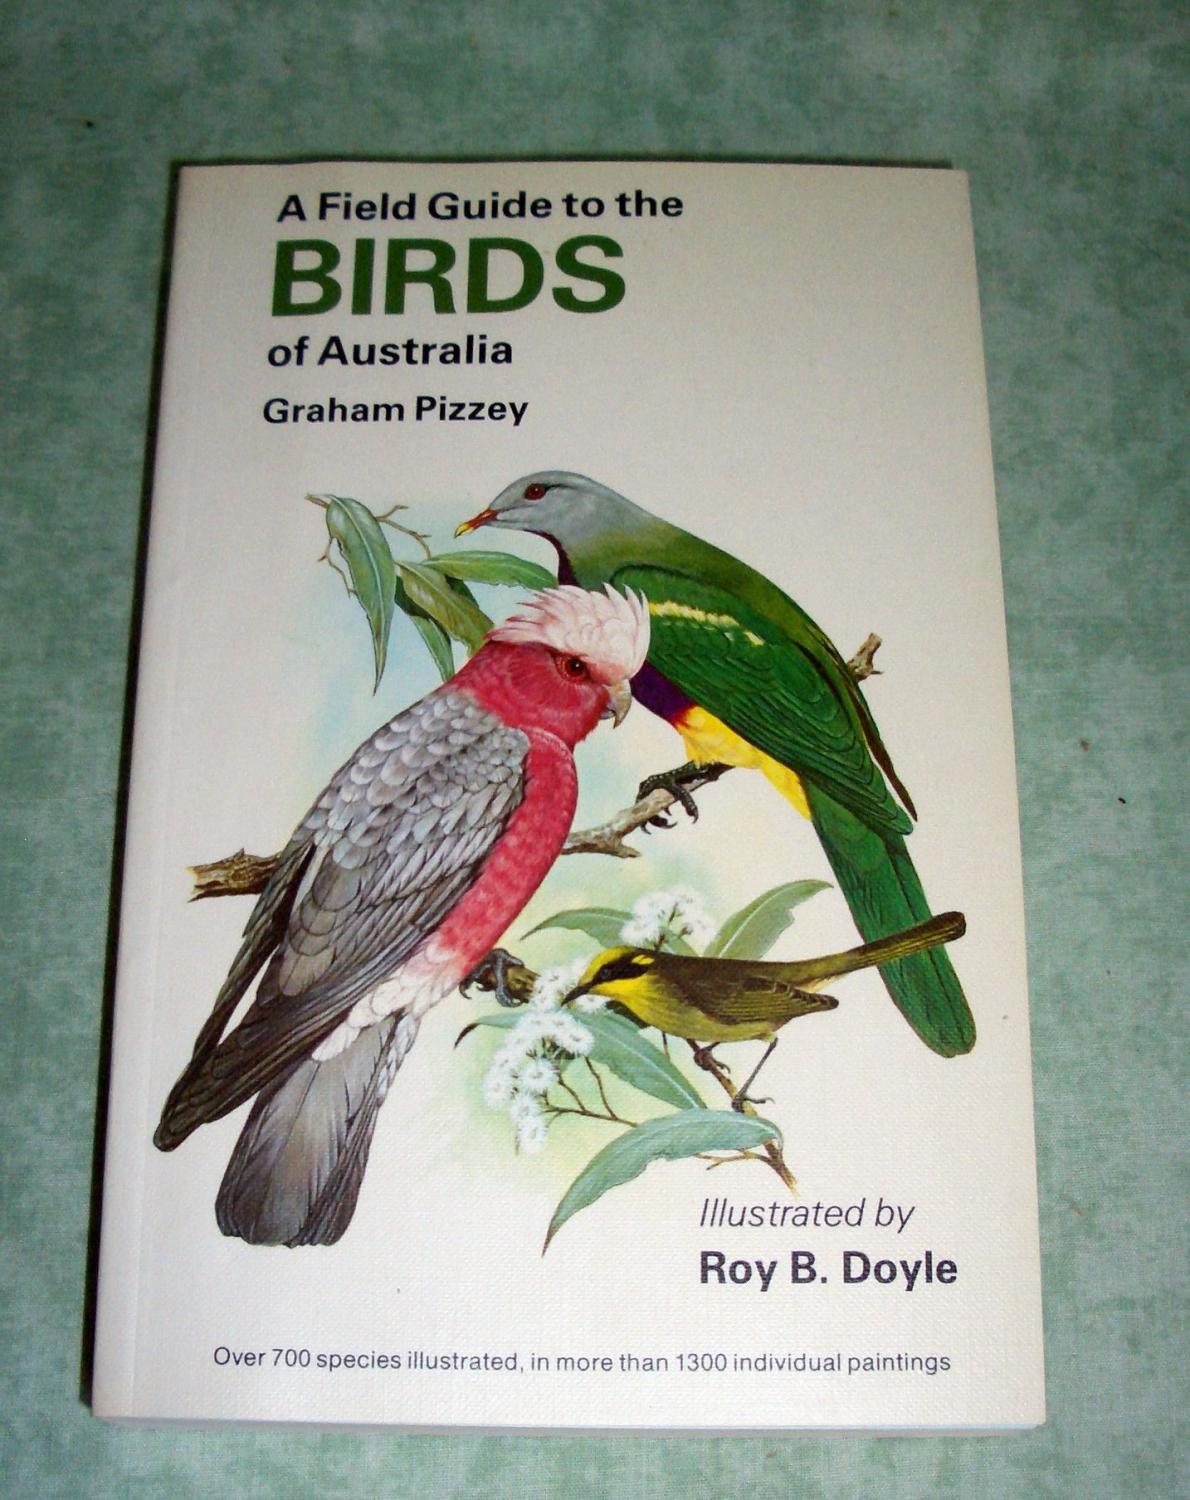 A field guide to the birds of Australia. - Ornithologie - Vogelkunde Pizzey, Graham.